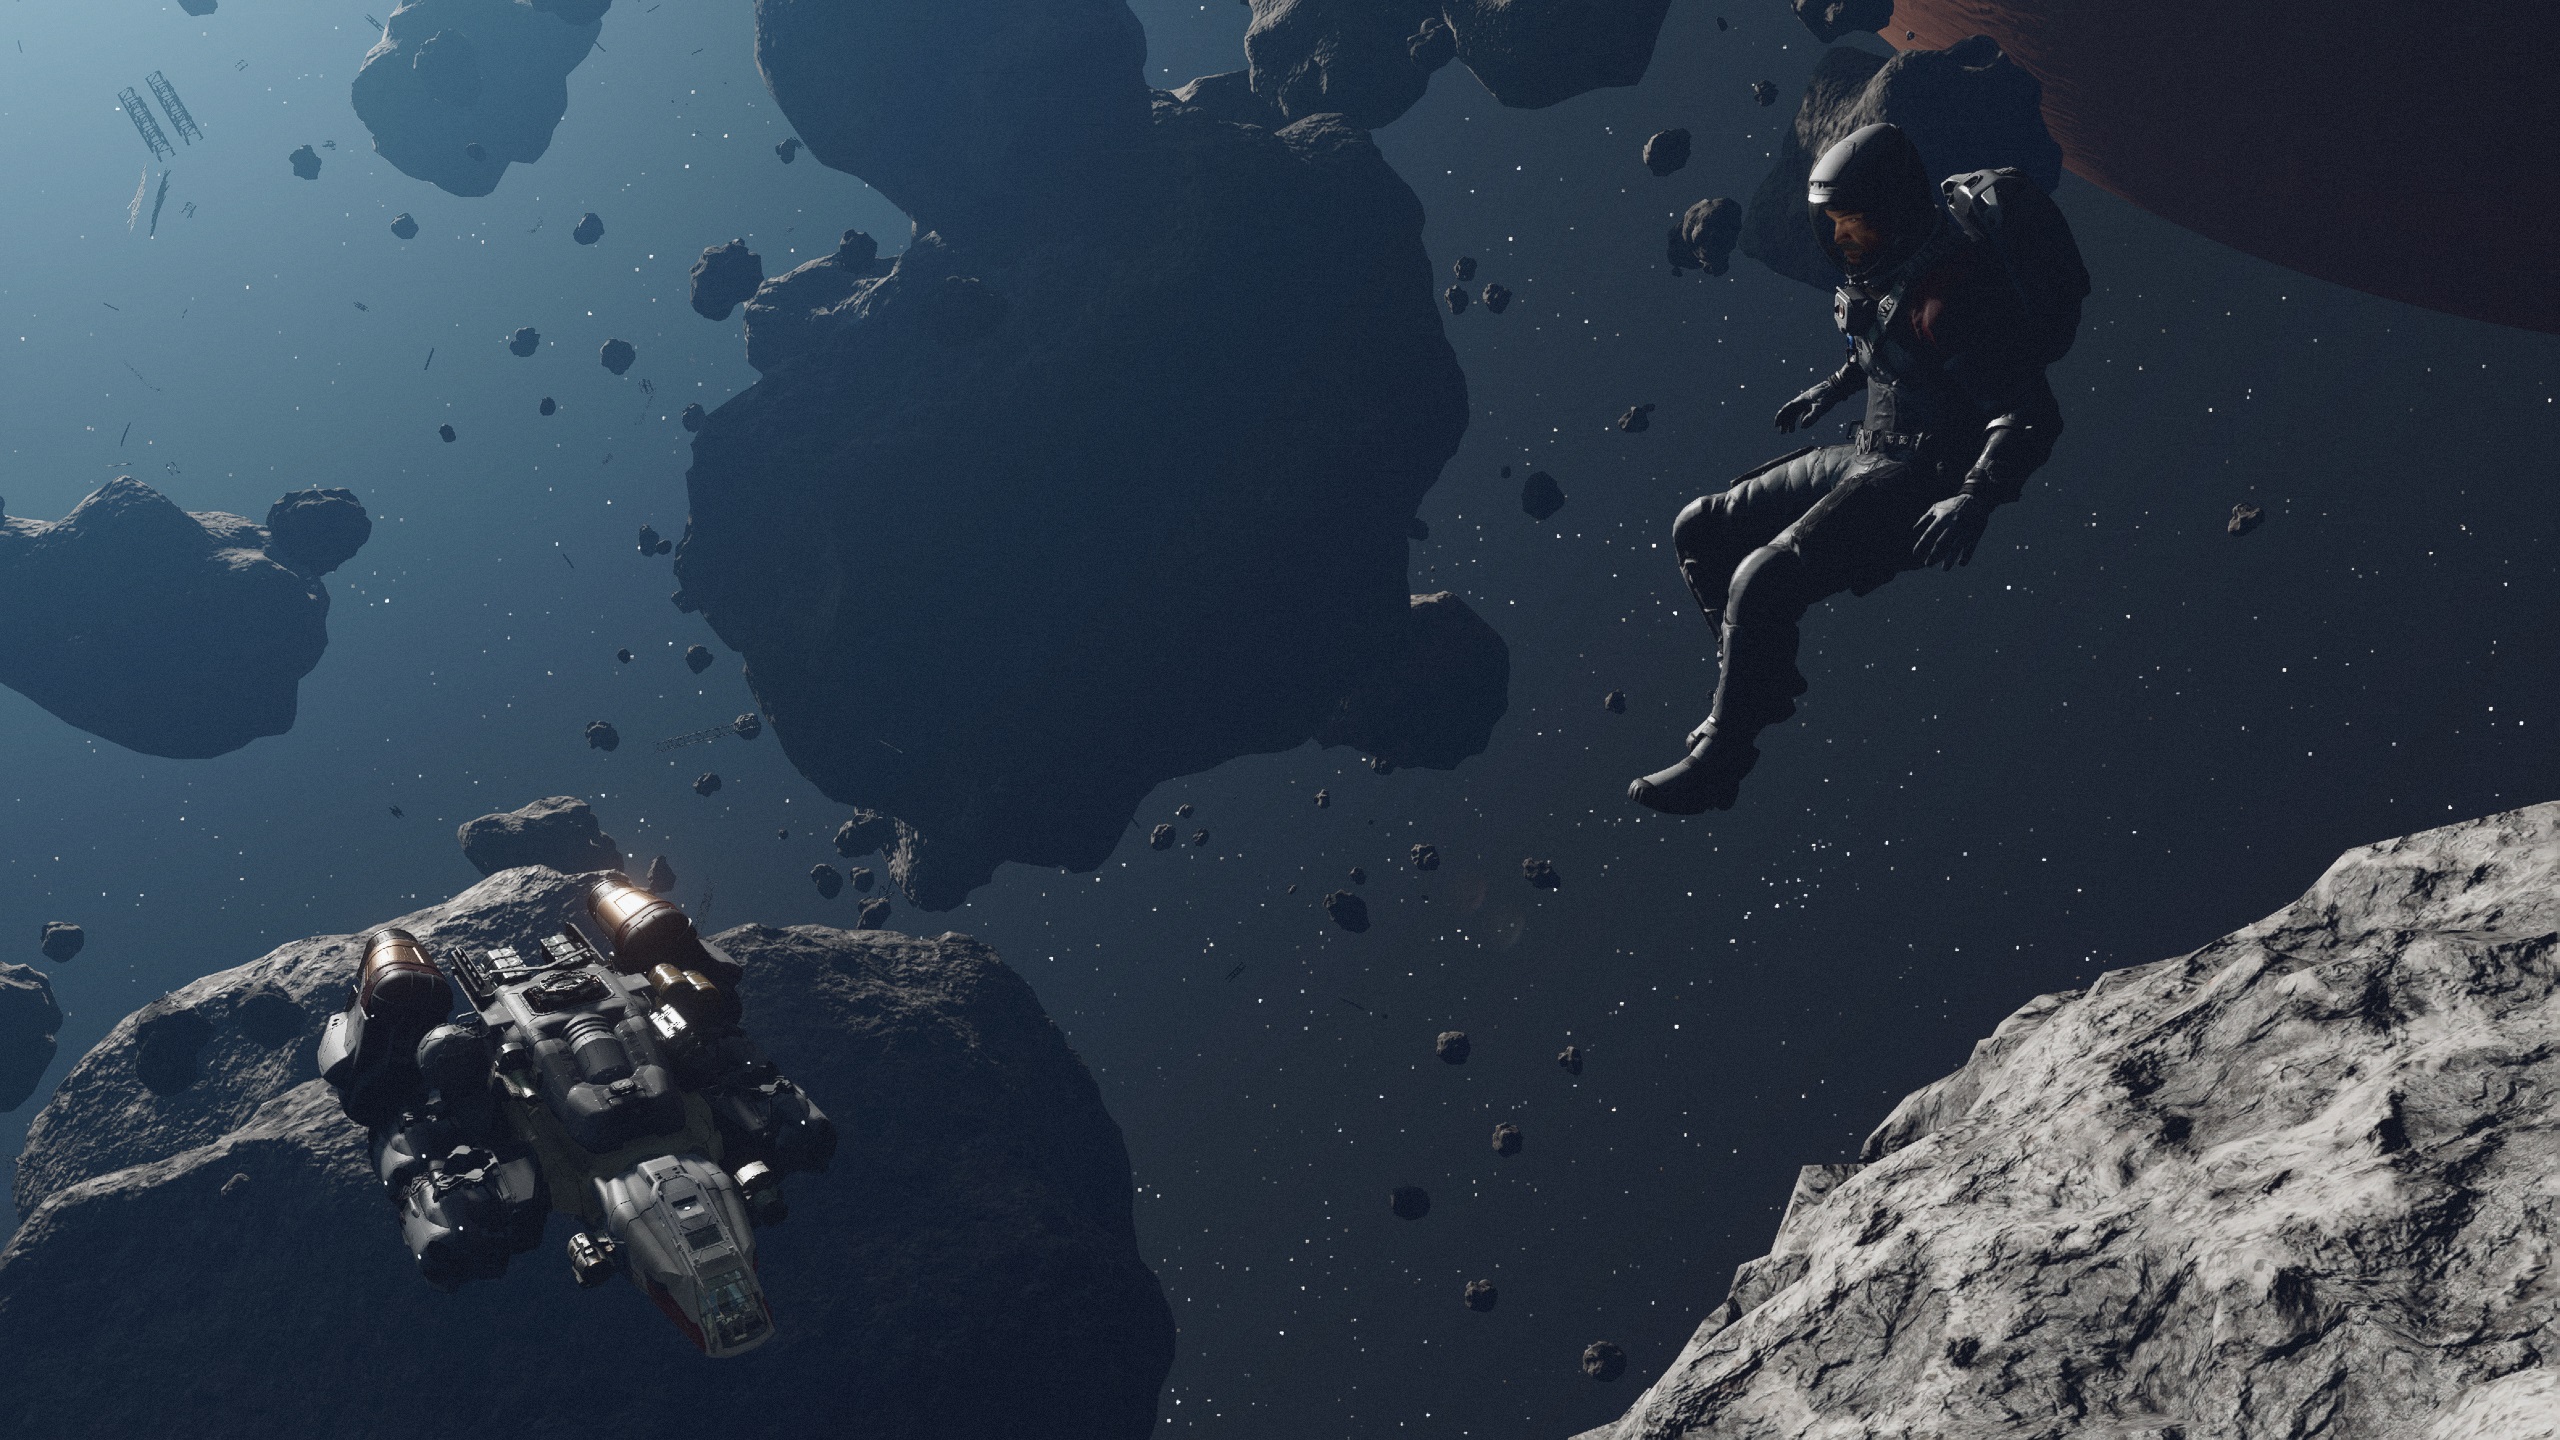 Starfield character in space suit floating amid asteroid field above gas giant